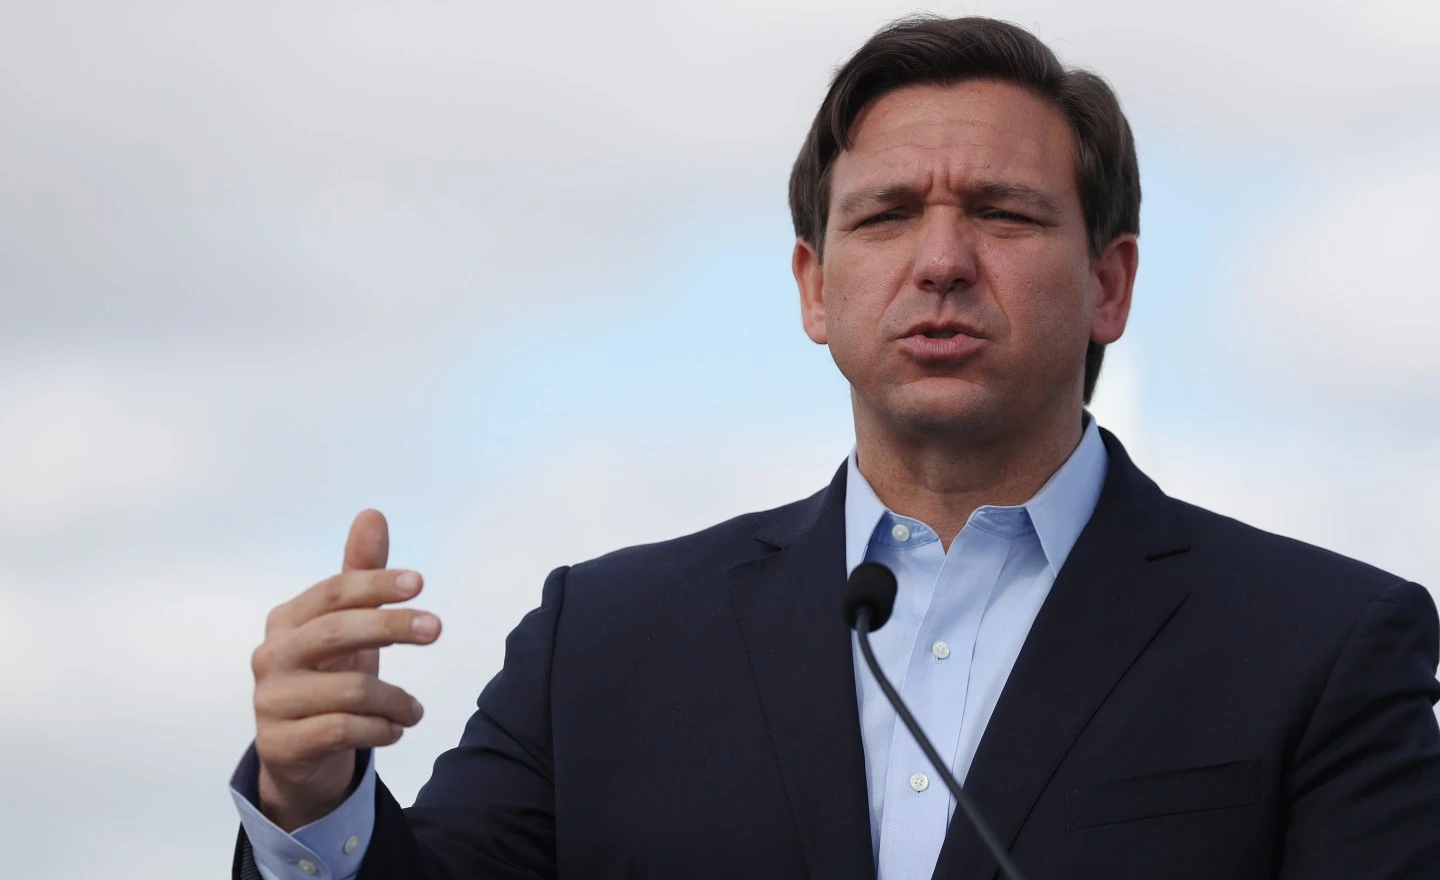 Ron DeSantis To Announce His Candidacy For President Of The United States With Elon Musk